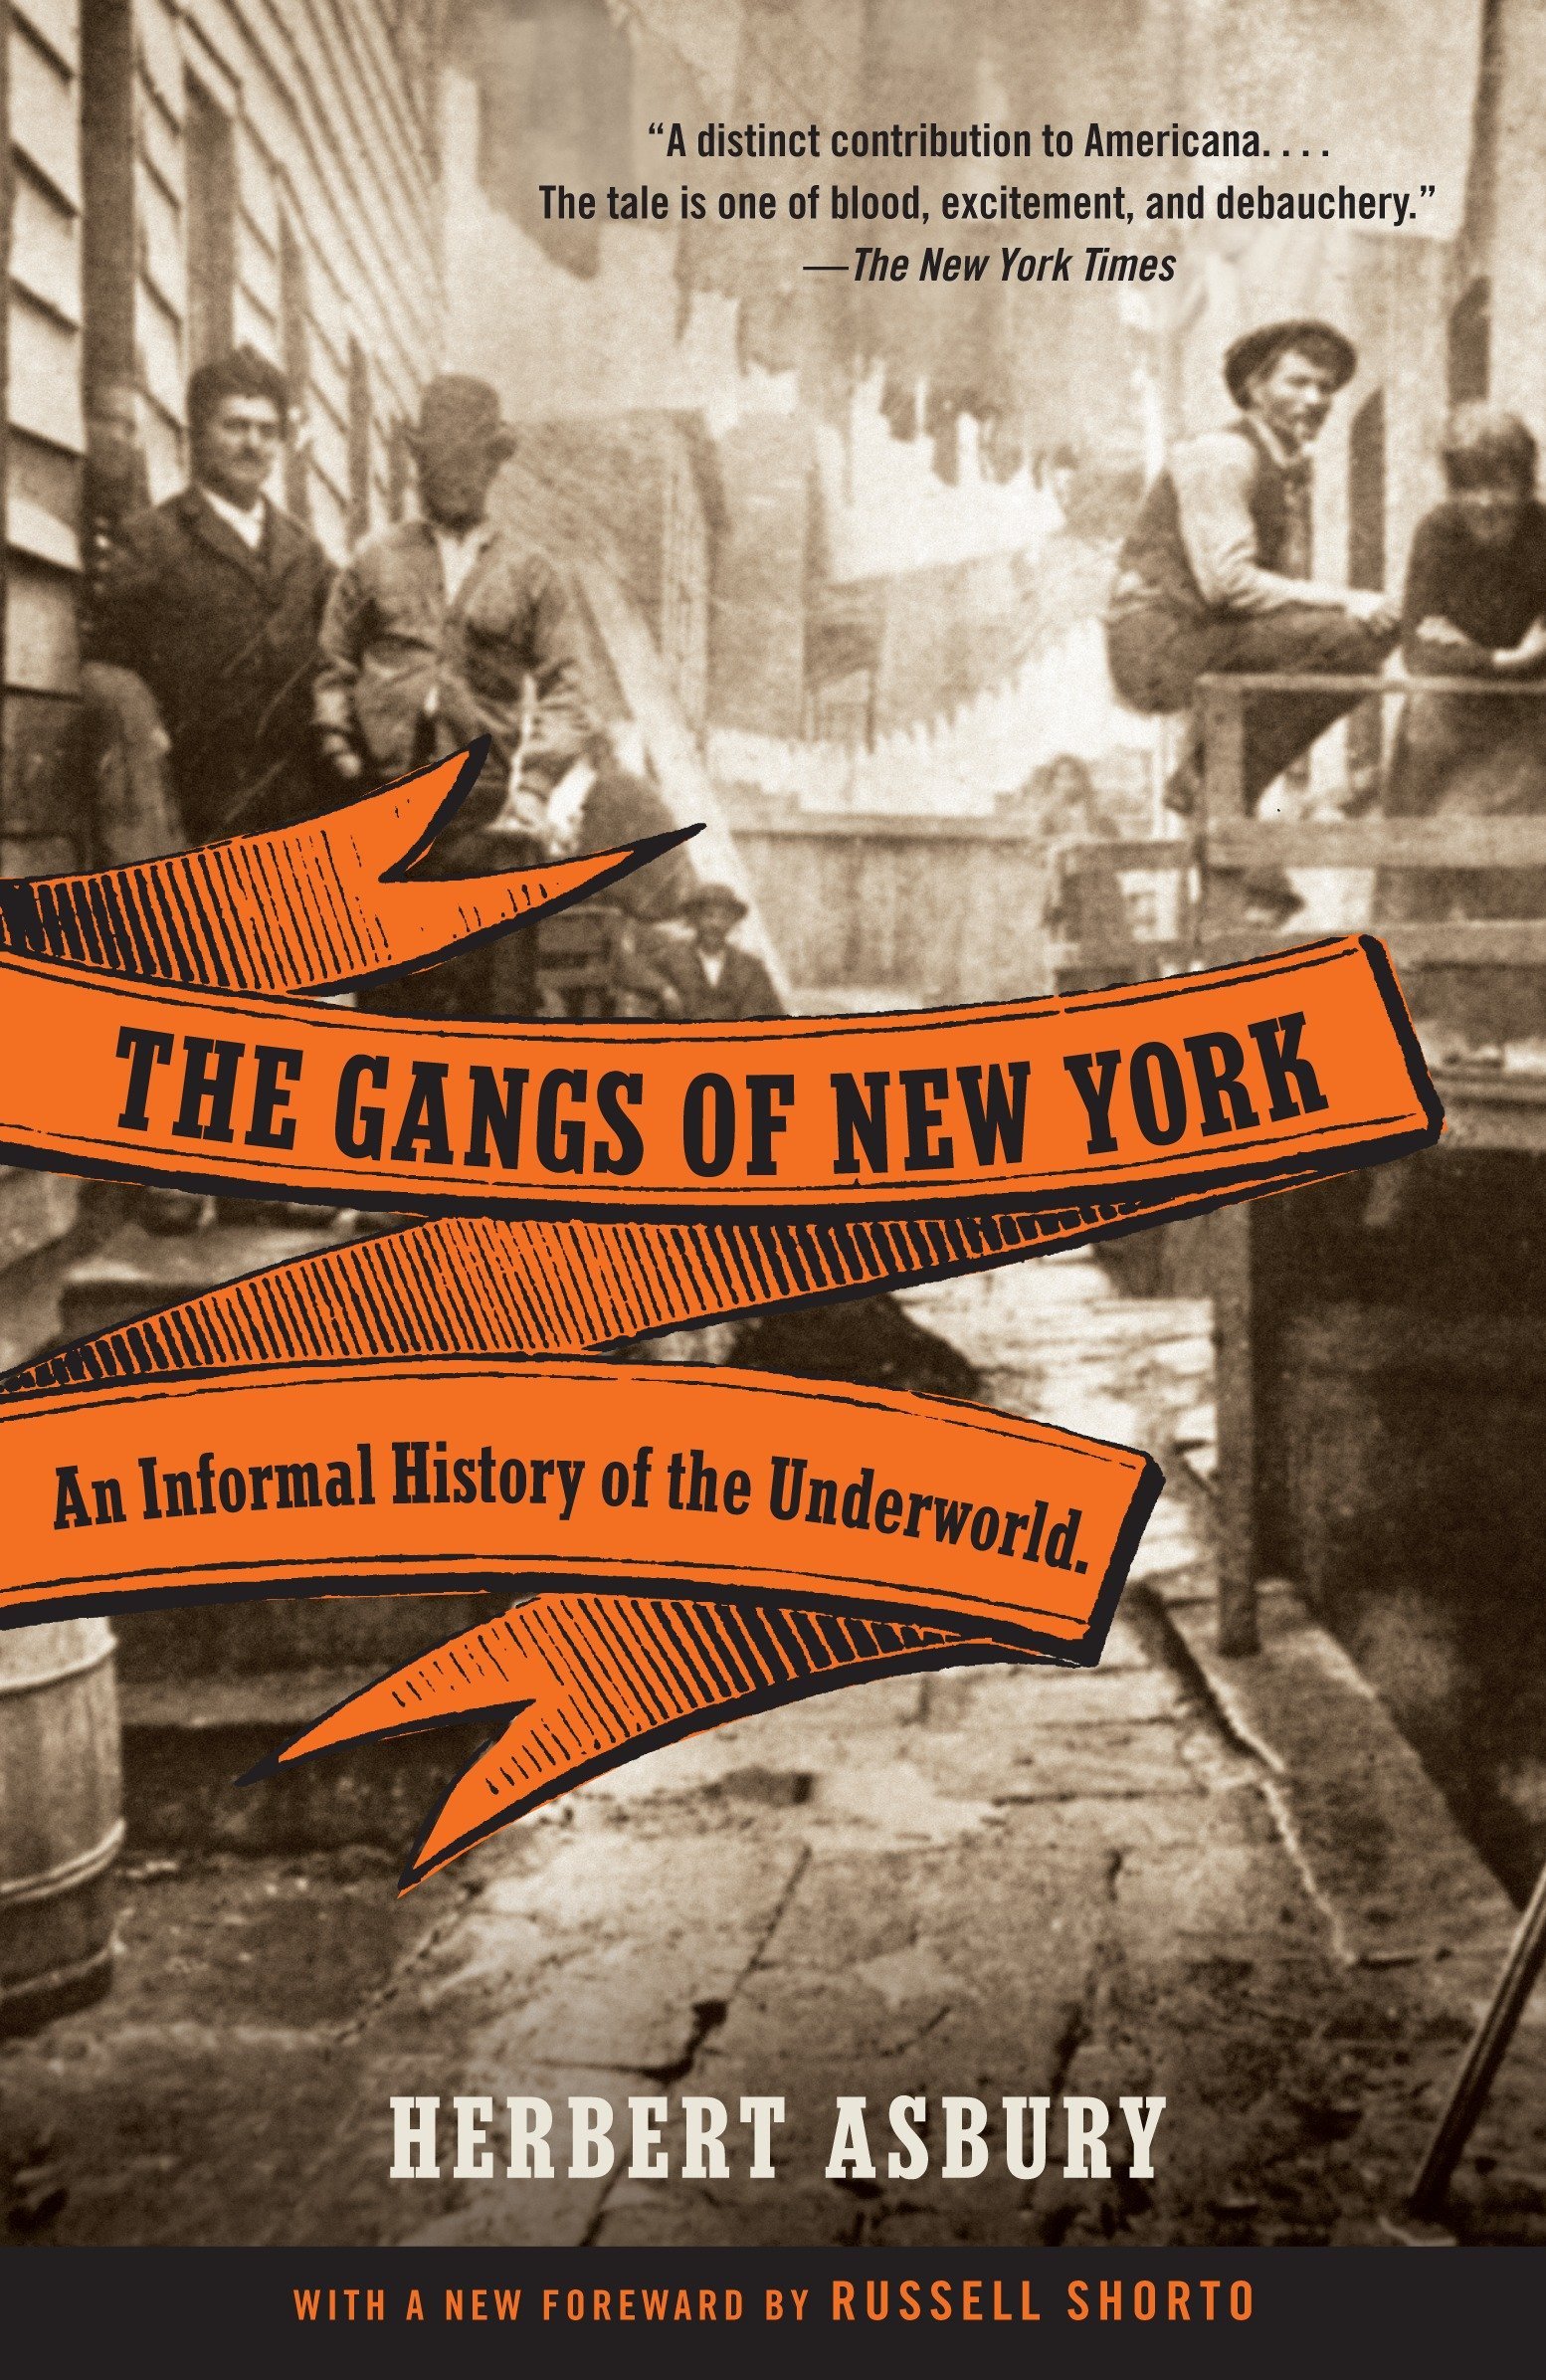 The Gangs of New York